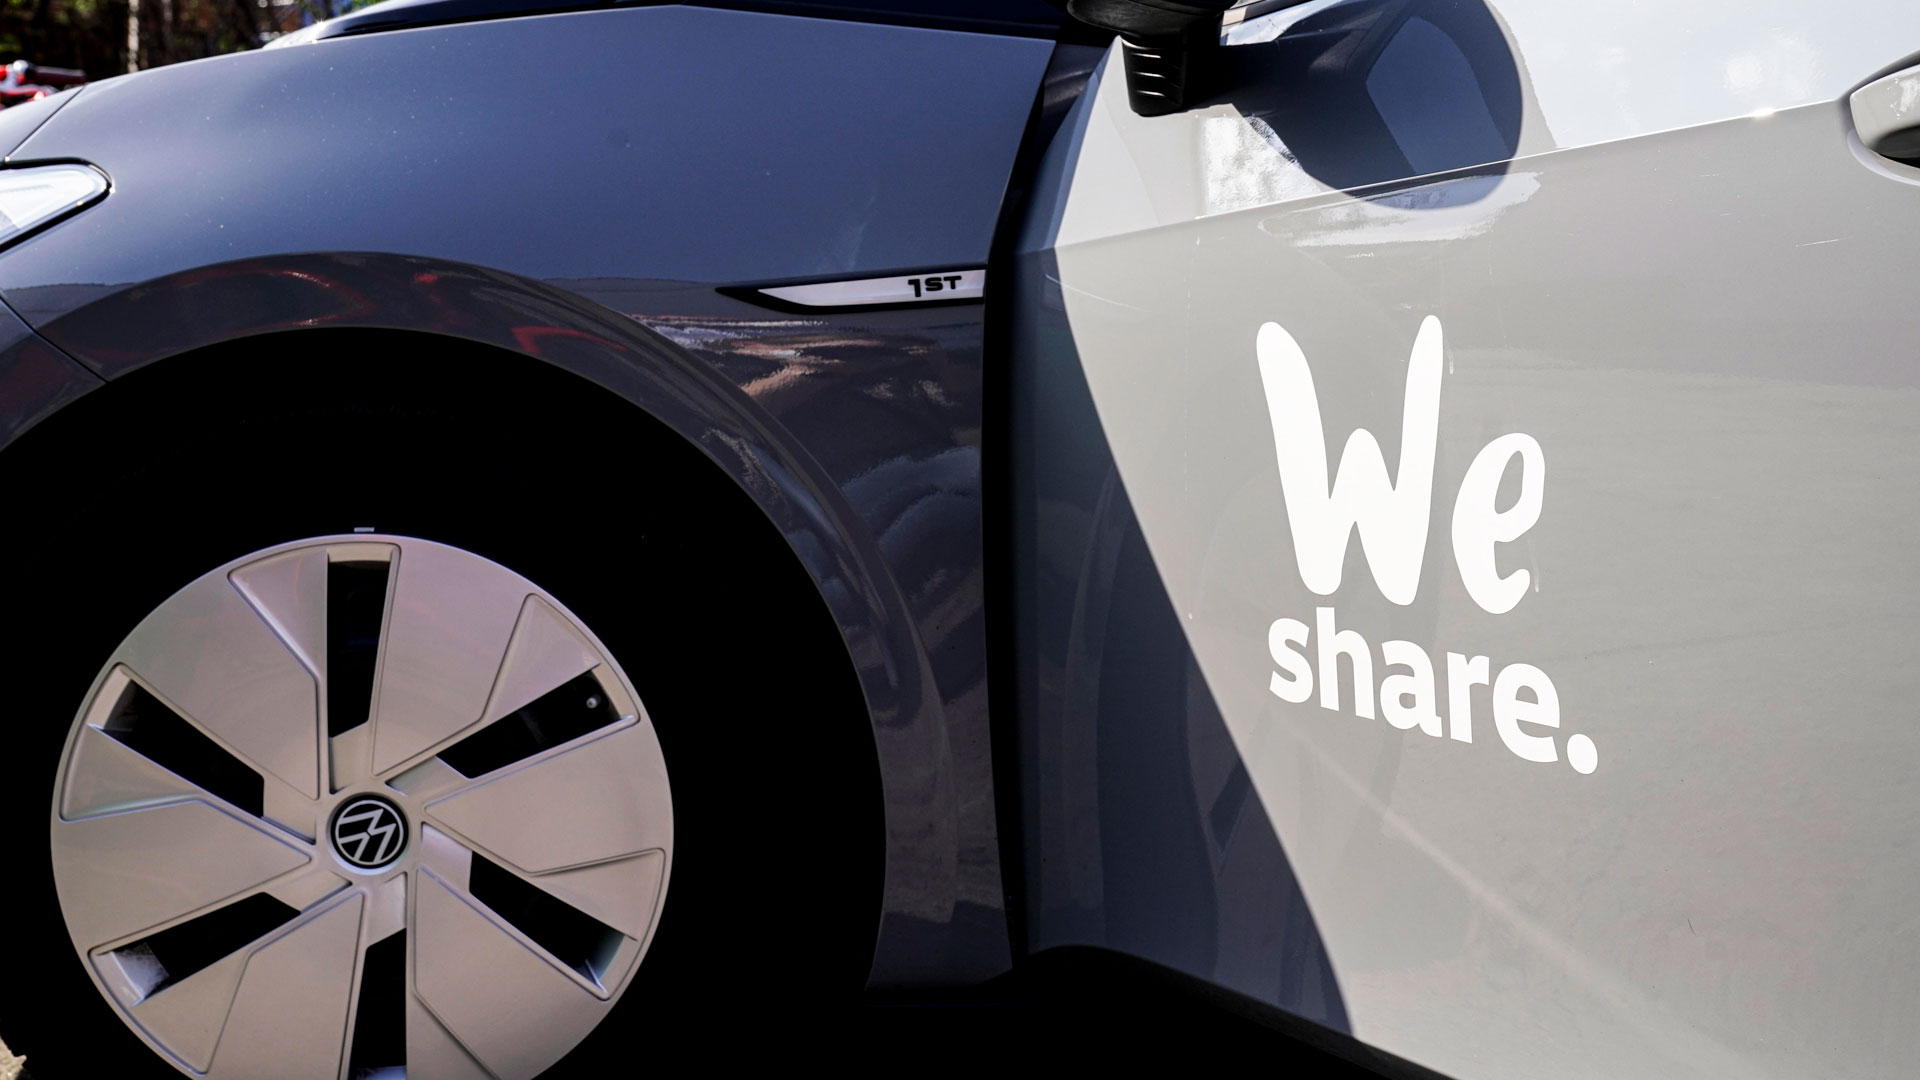  Logo am Volkswagen Auto des Sharing Anbieters - WeShare  | picture alliance / Flashpic